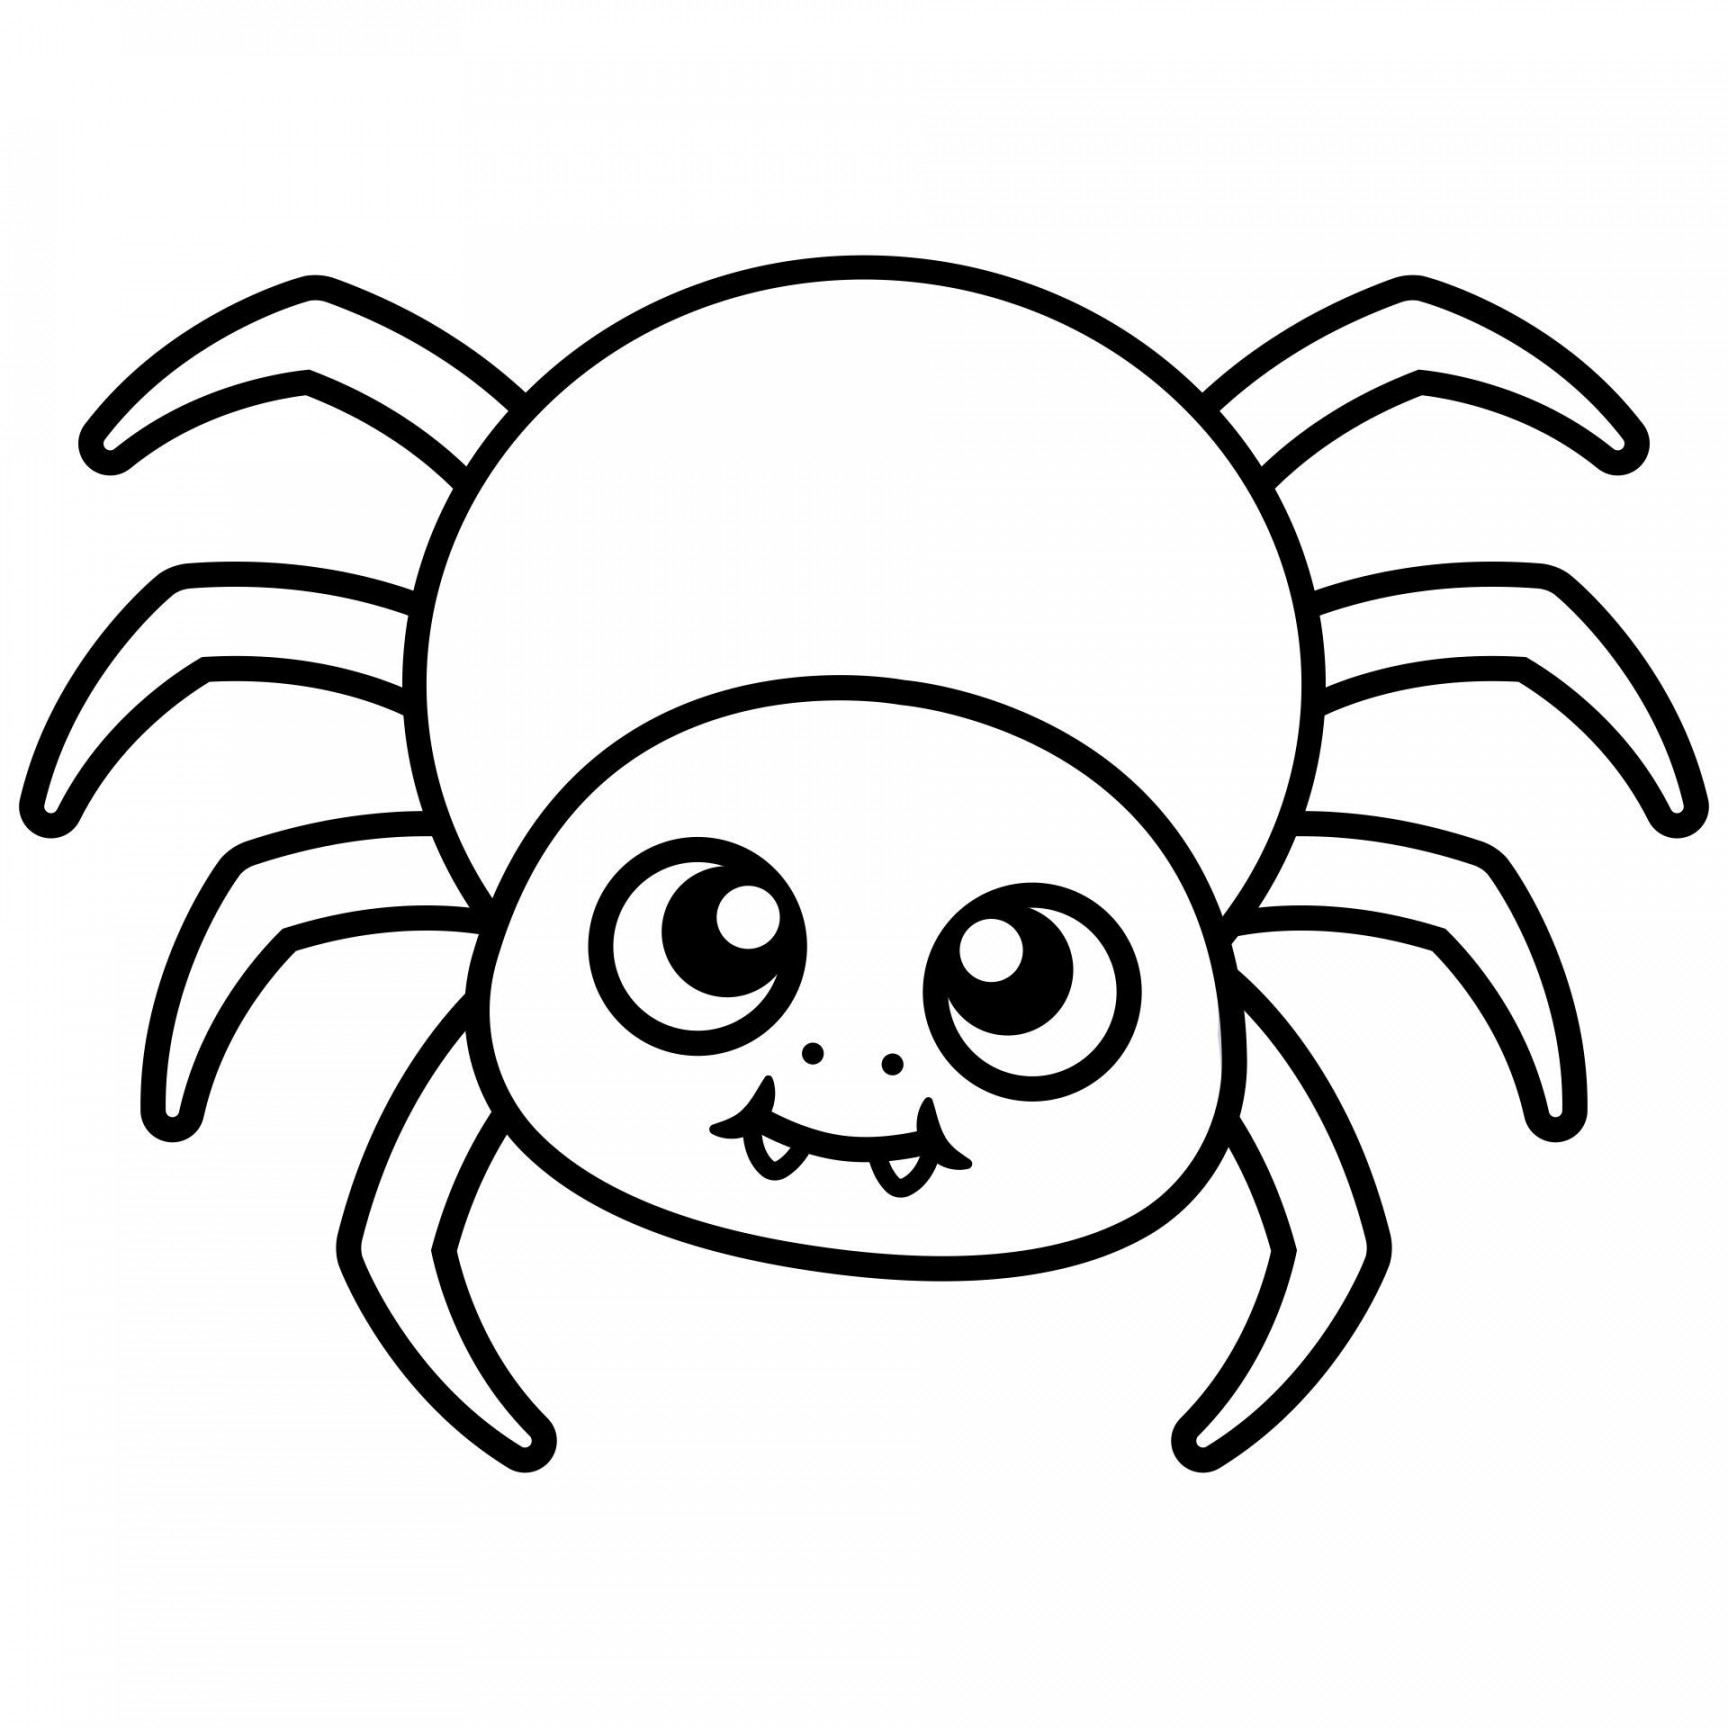 Printable Spider Coloring Pages  Halloween coloring, Spider